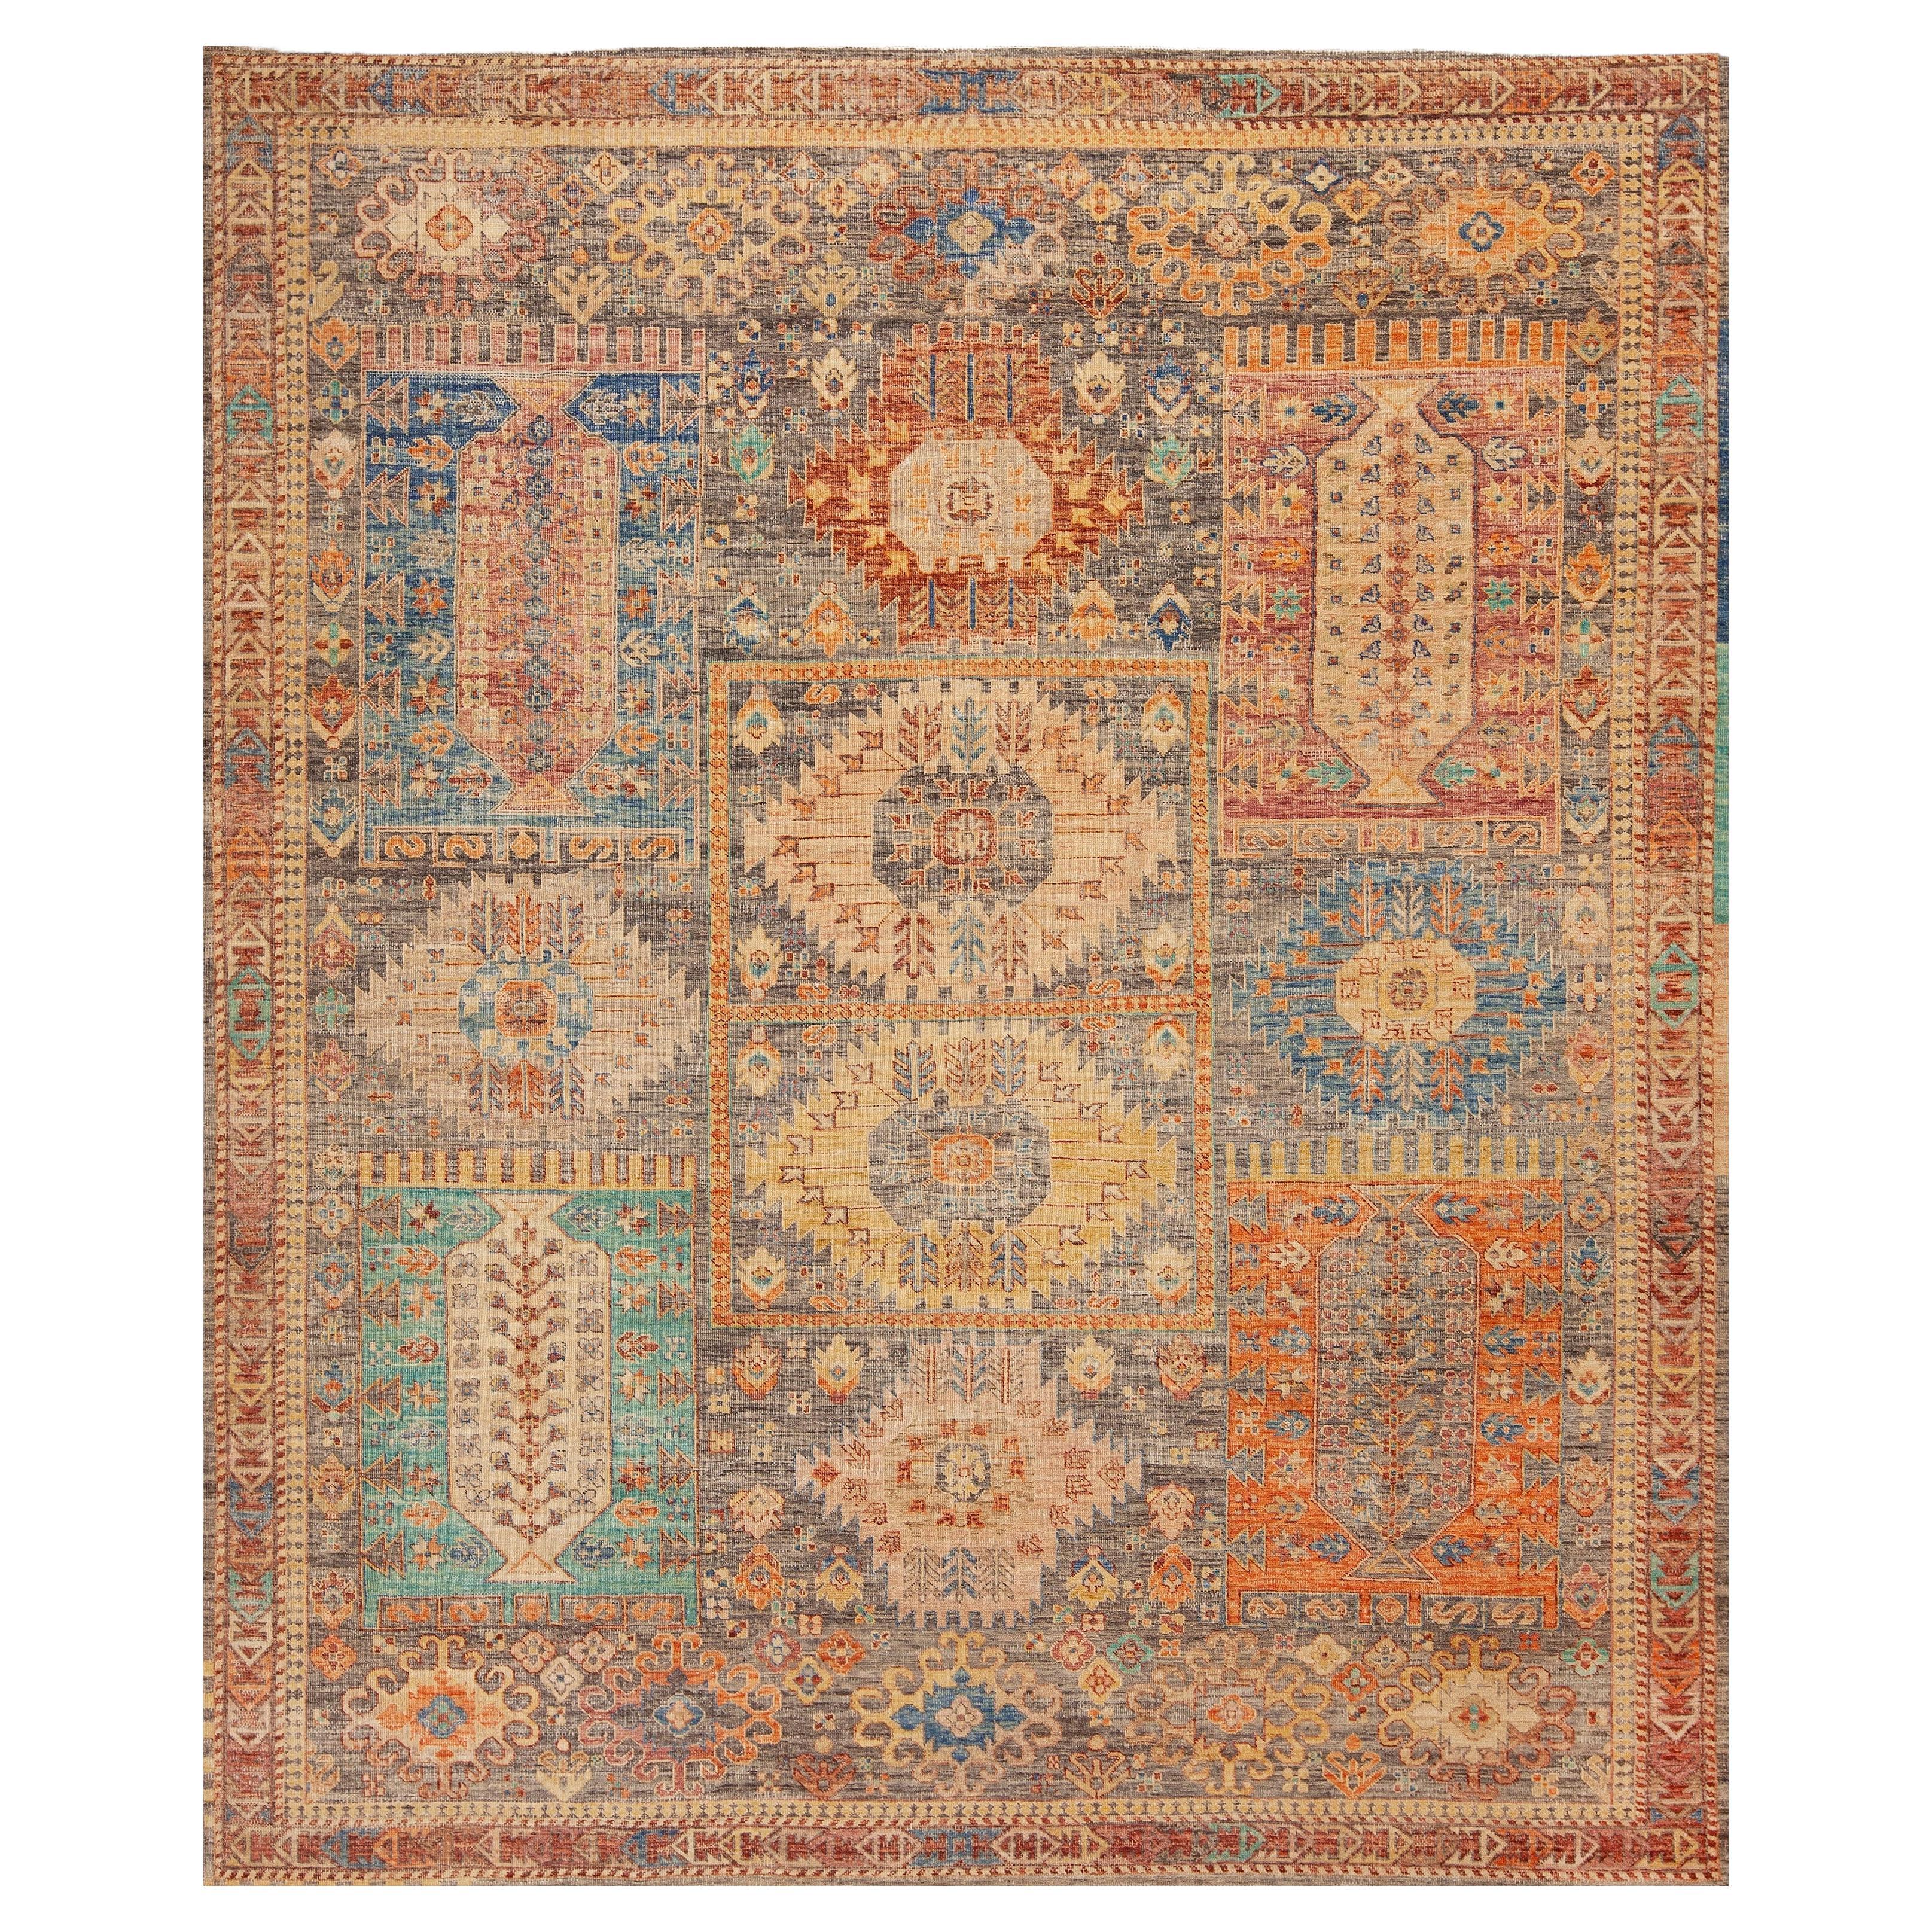 Nazmiyal Collection Tribal Allover Geometric Design Modern Area Rug 8'3" x 9'6" For Sale